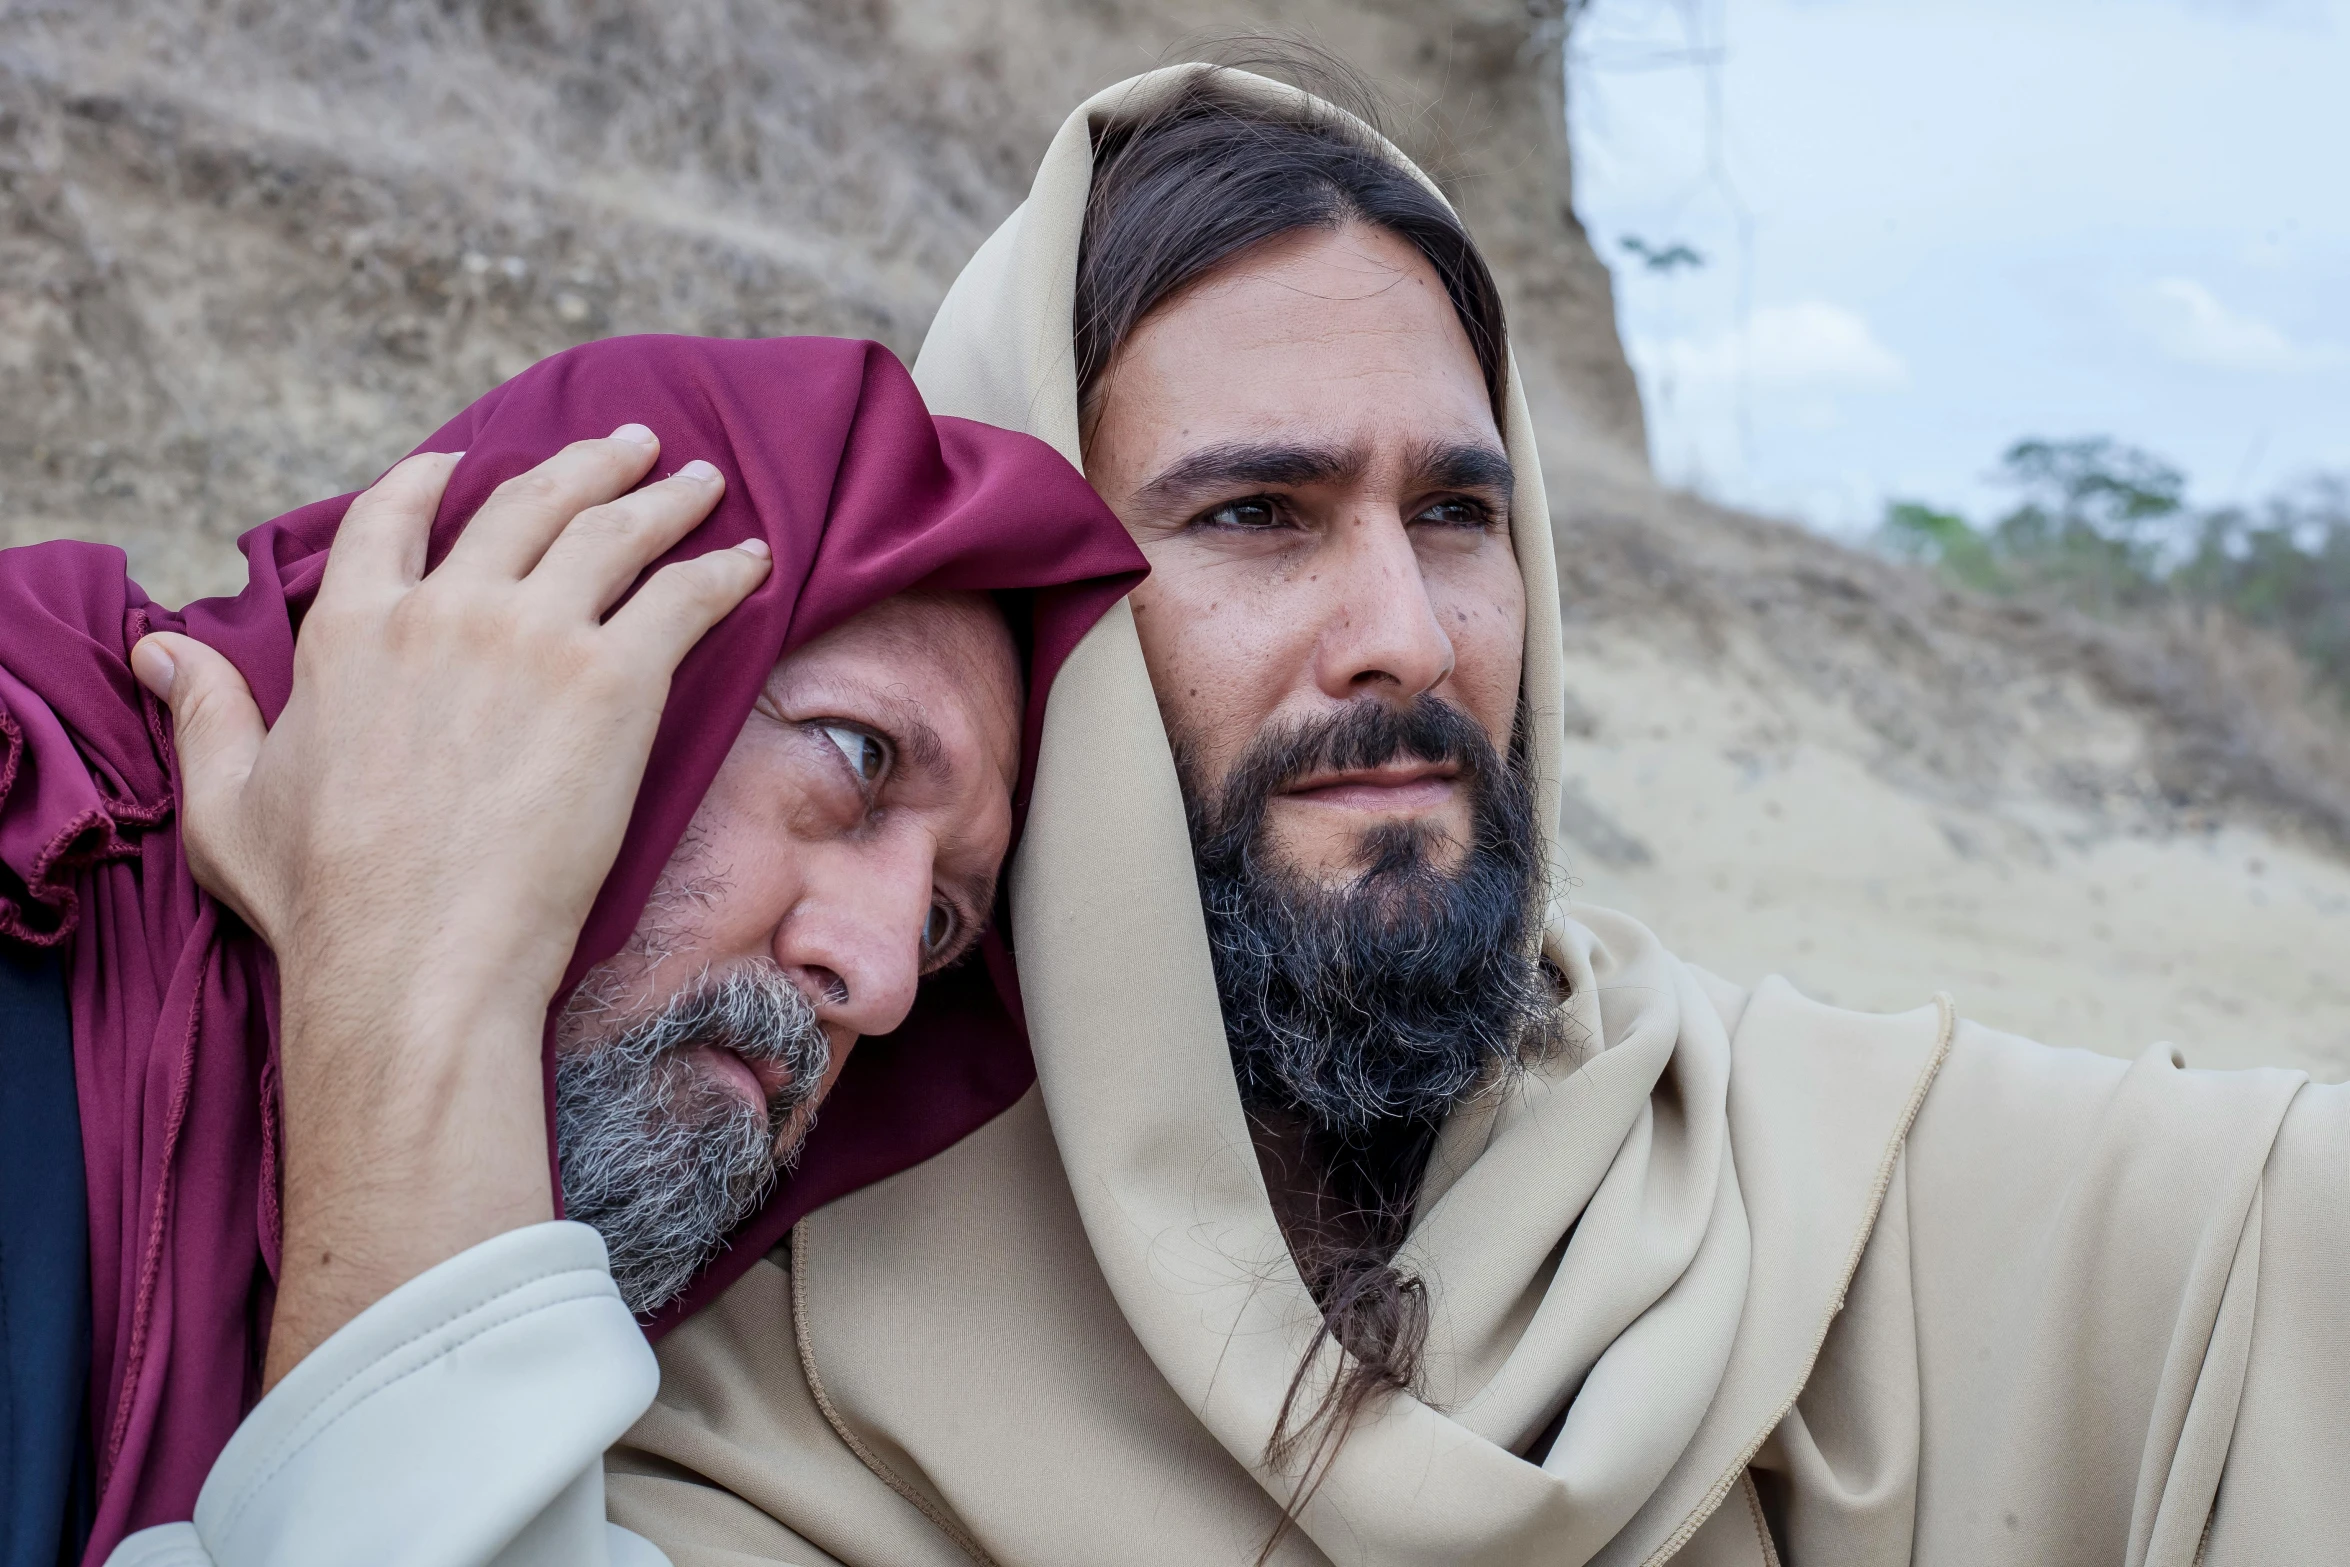 a couple of men standing next to each other, unsplash, renaissance, dressed like jesus christ, avatar image, actor, close - up photograph